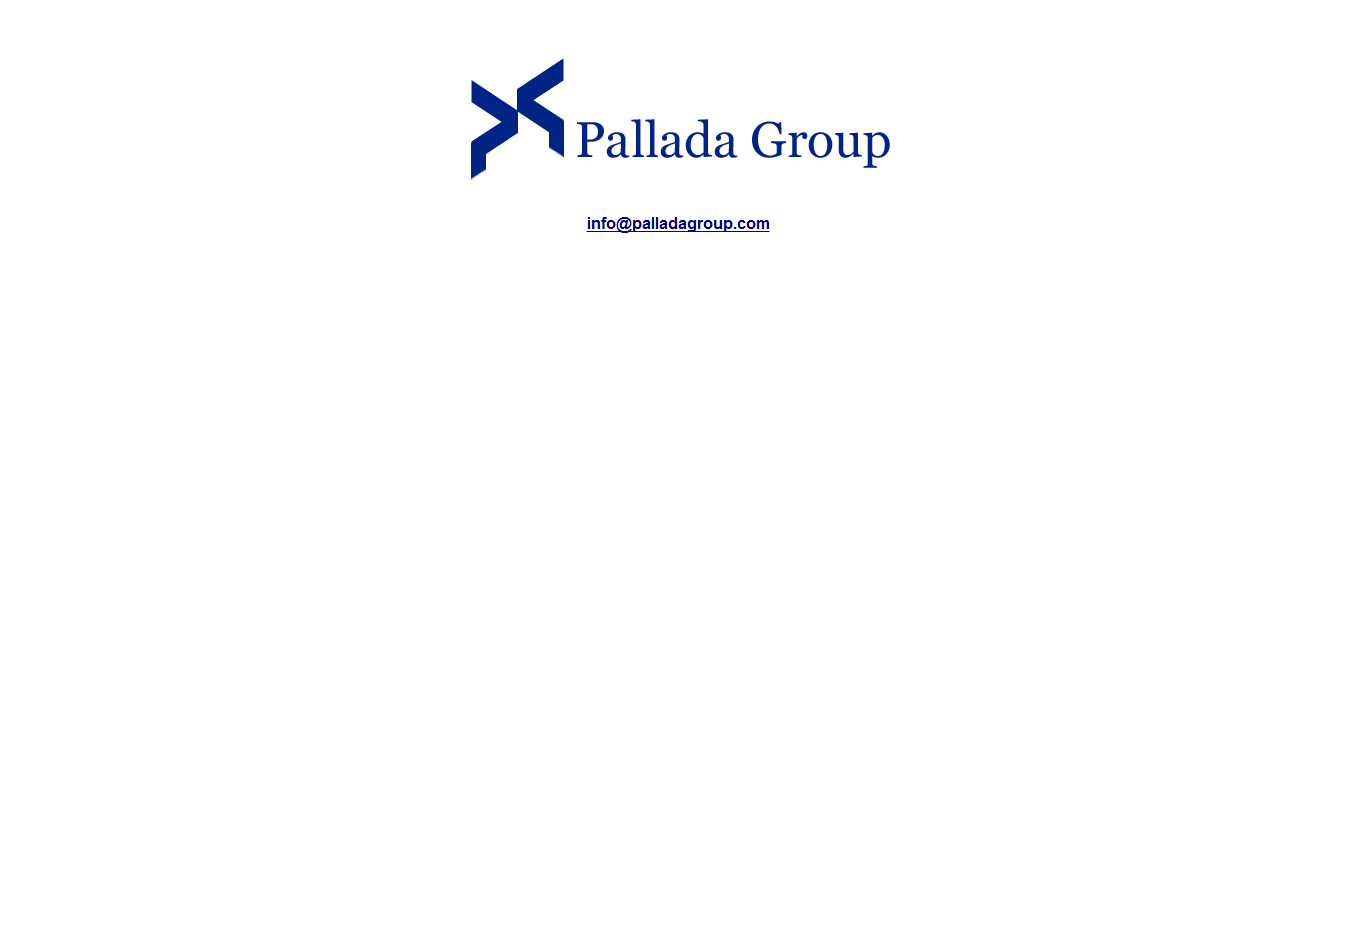 Welcome to Pallada Group